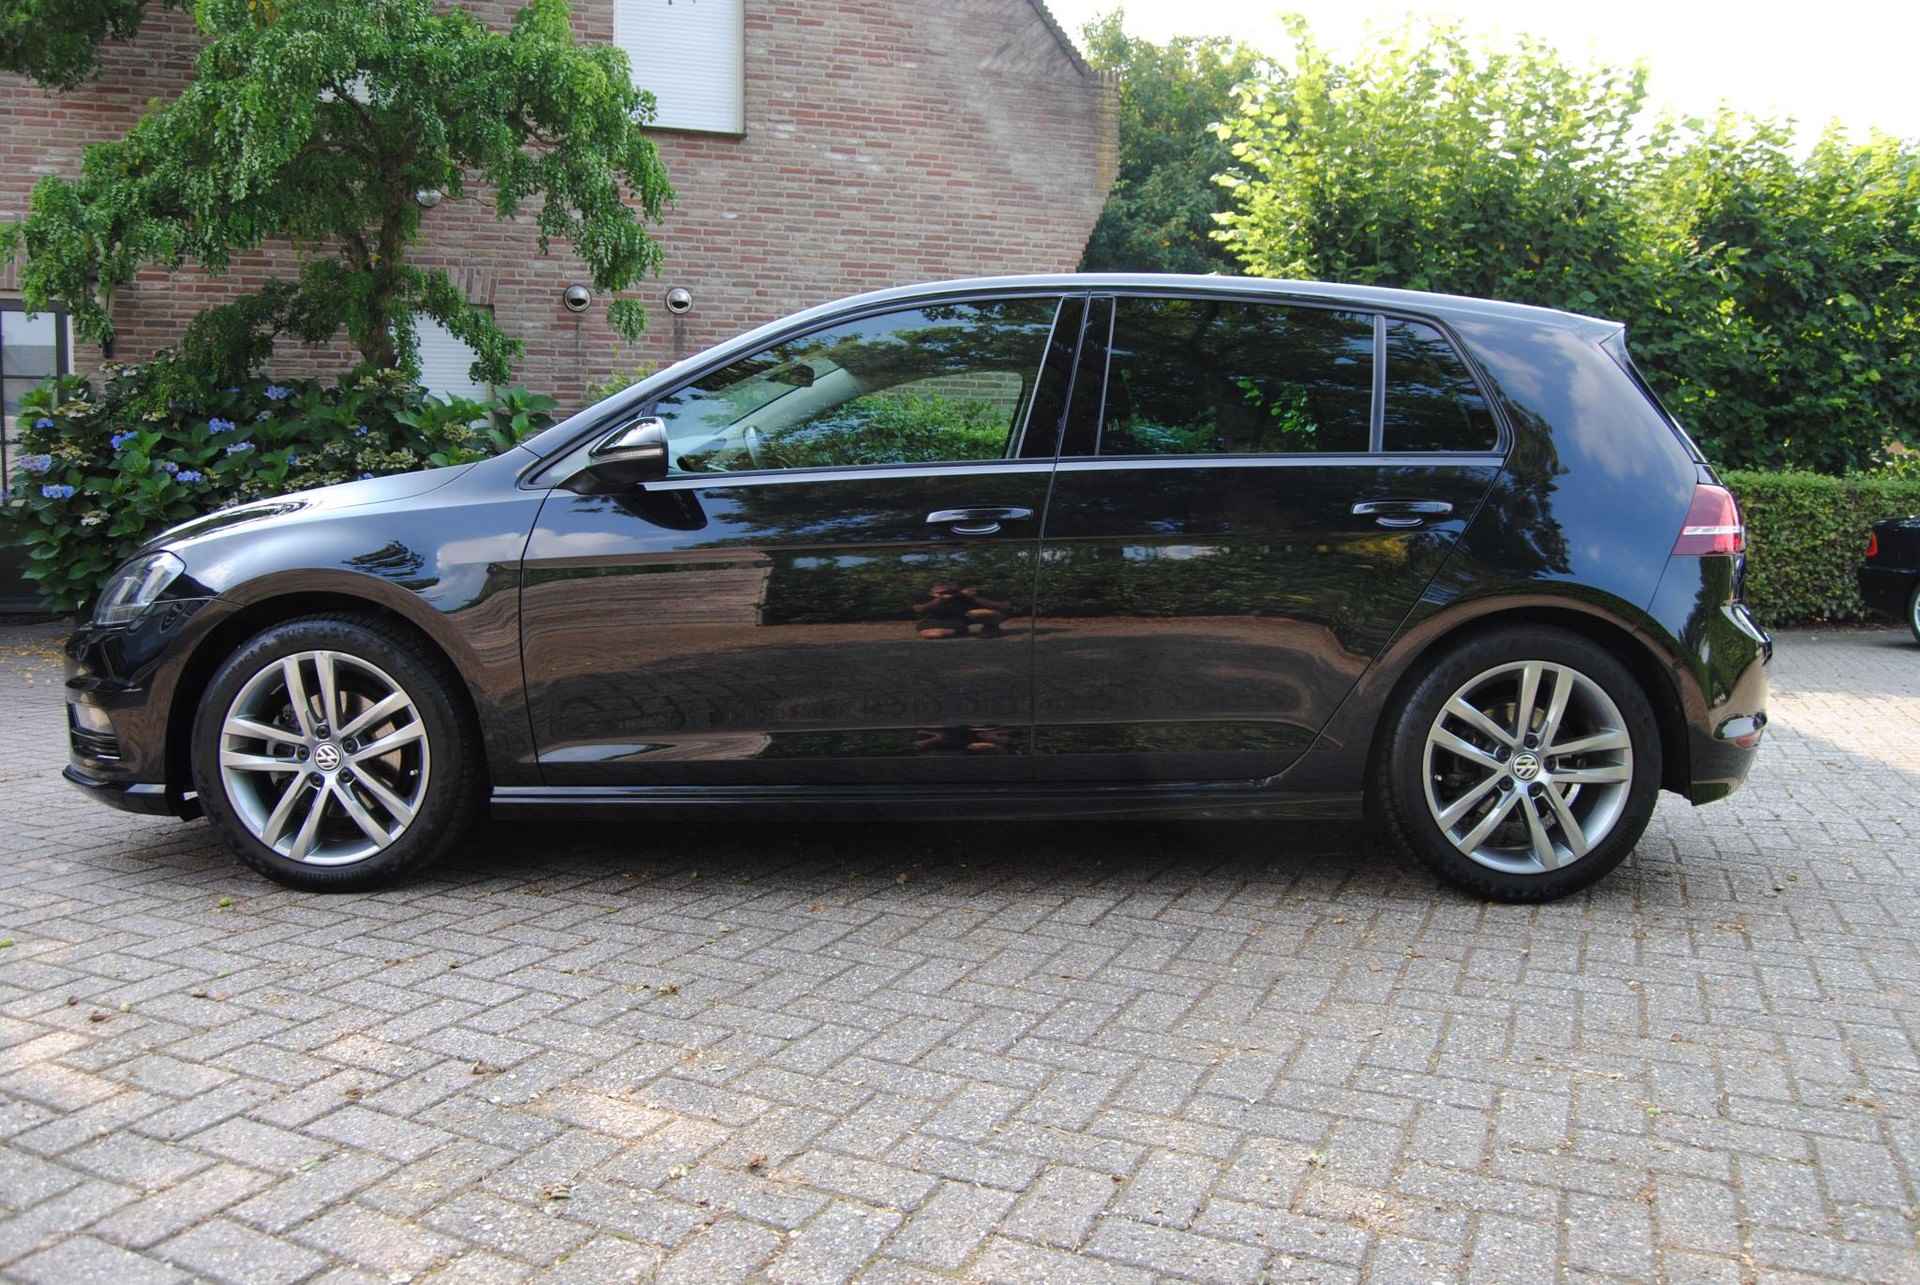 Volkswagen Golf 1.4 TSI Highline Business R-Line Navigatie, adaptive cruise controle, Bluetooth, Climate controle - 8/27